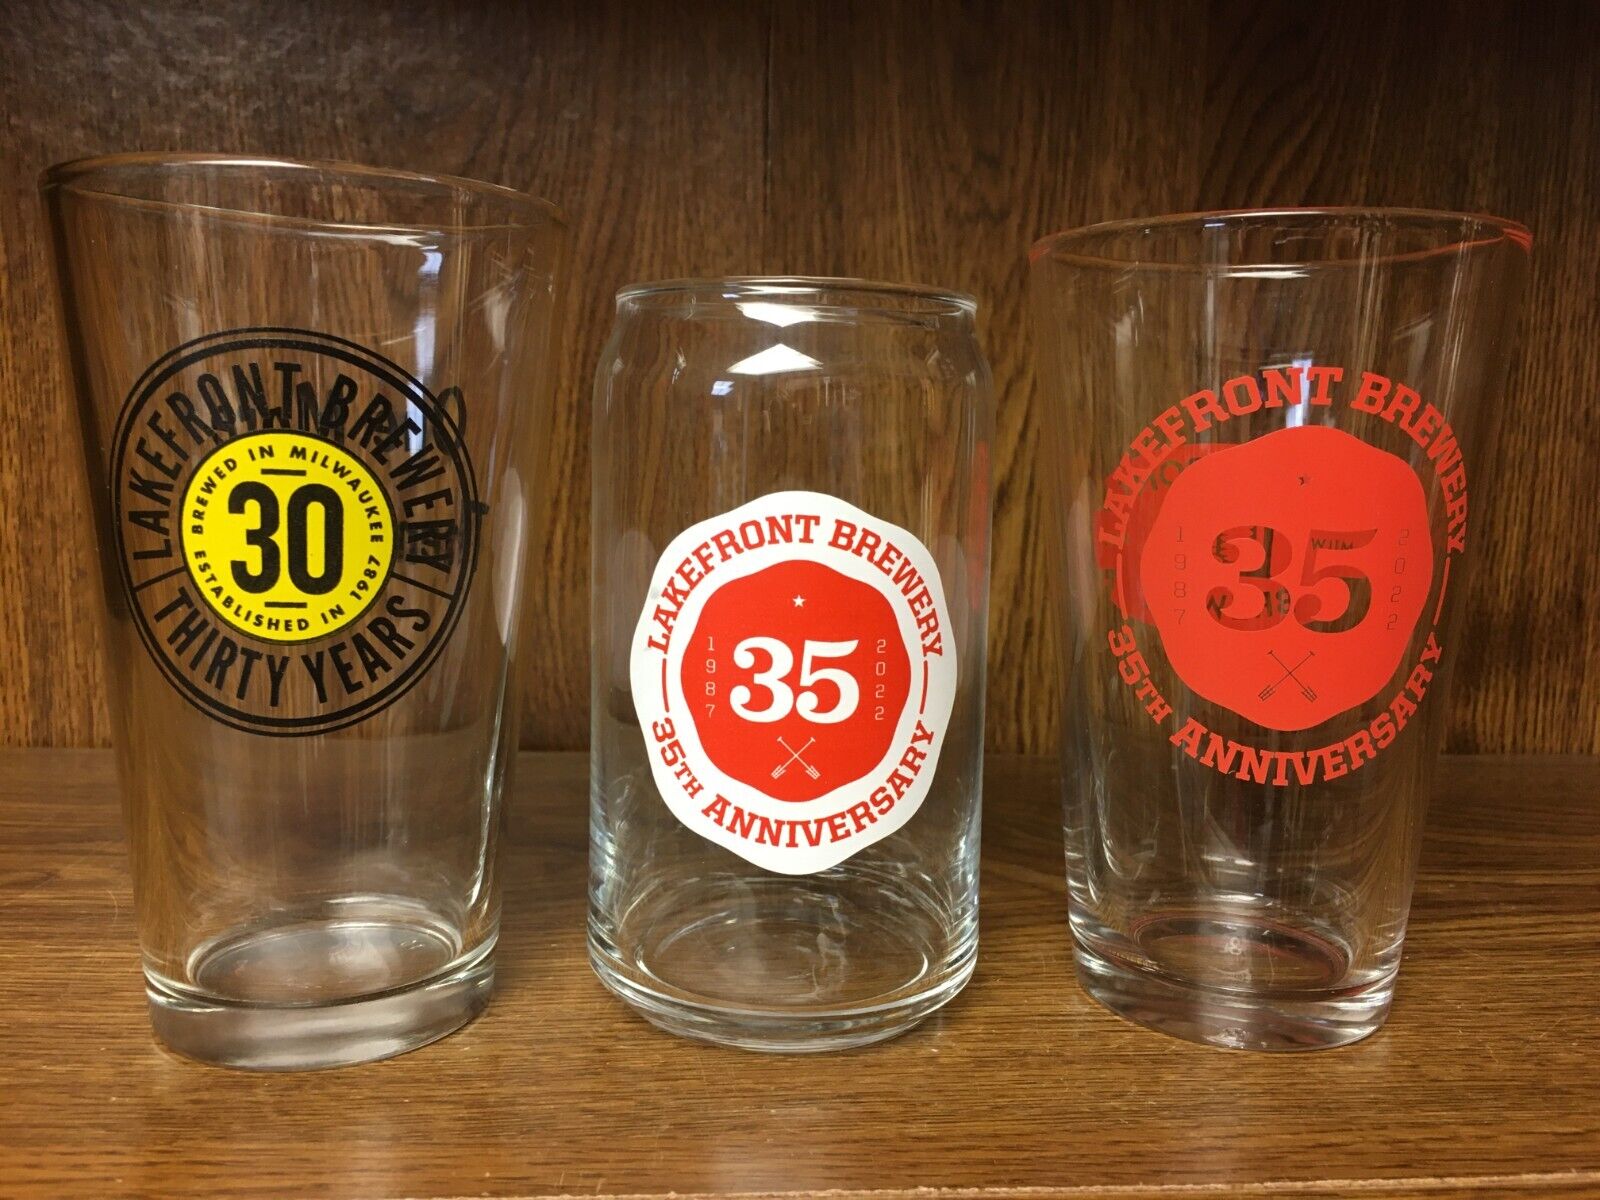 3 Lakefront Brewery in MKE Anniversary pint glasses: 30 years & (2) 35 years.